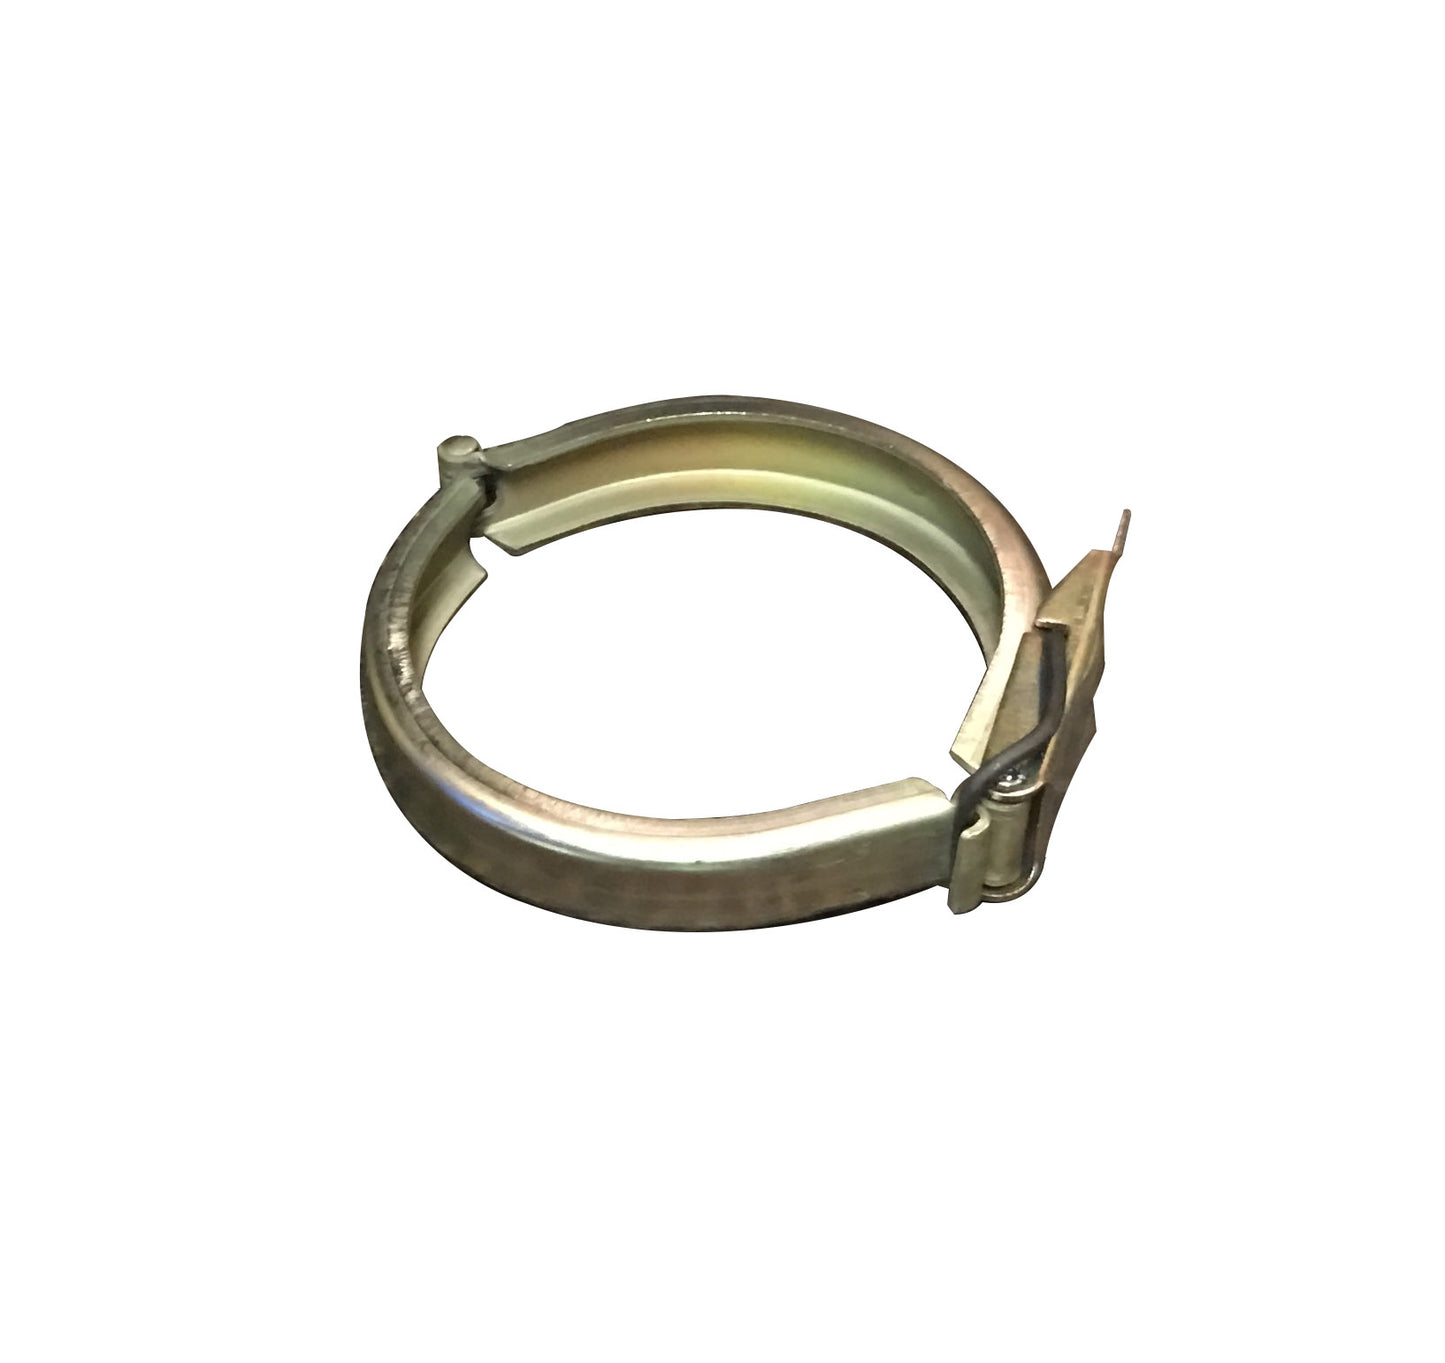 Sewer Cleaning Tube Clamp